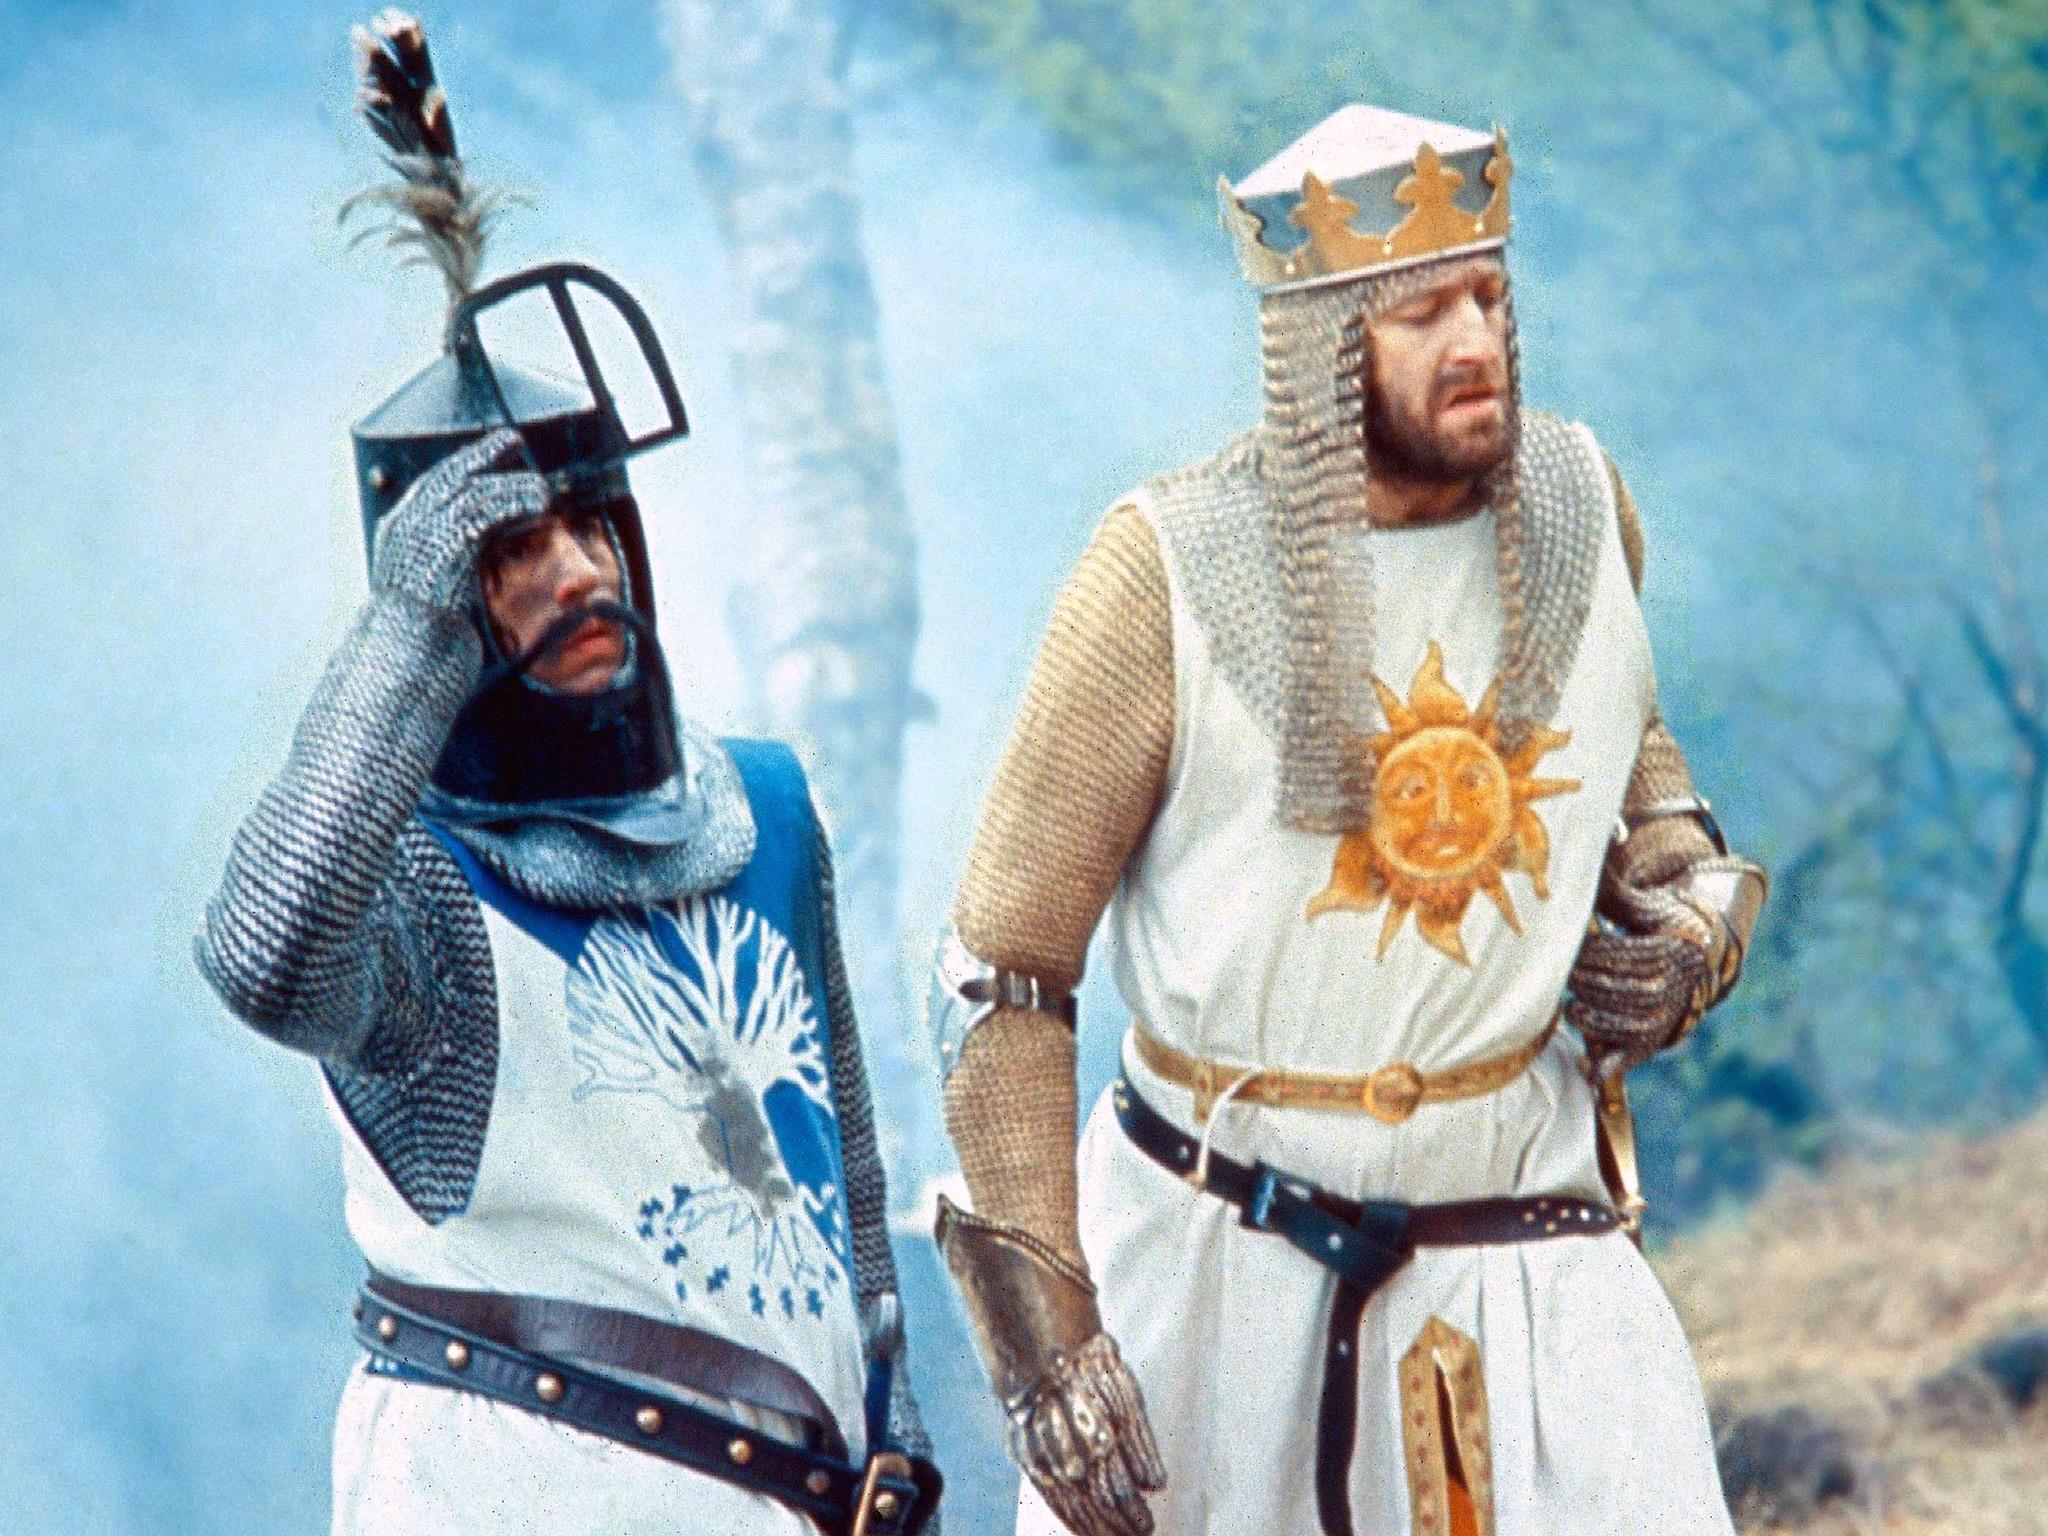 And now for something completely different: Monty Python&amp;#39;s &amp;#39;lost ...